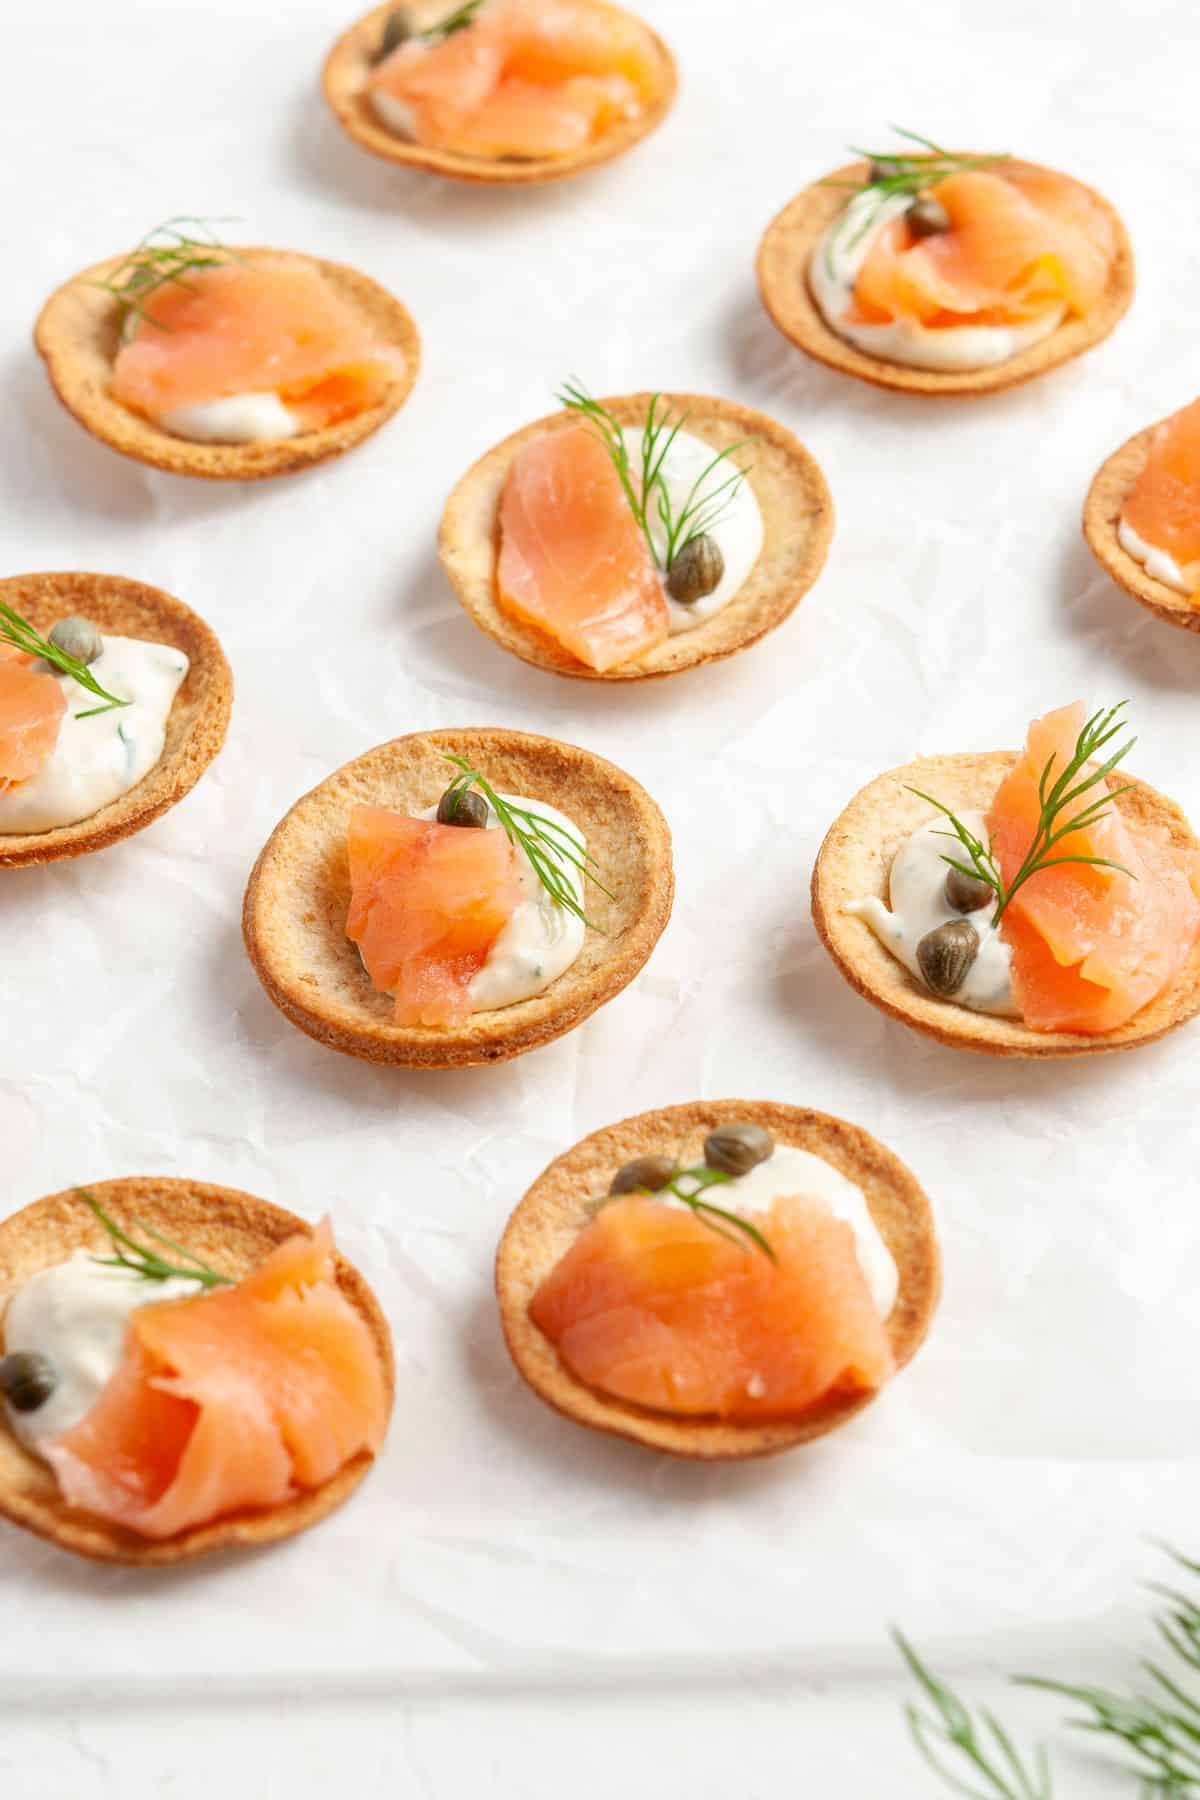 Gluten Free Tartlets with Hot Smoked Salmon and Cream Cheese